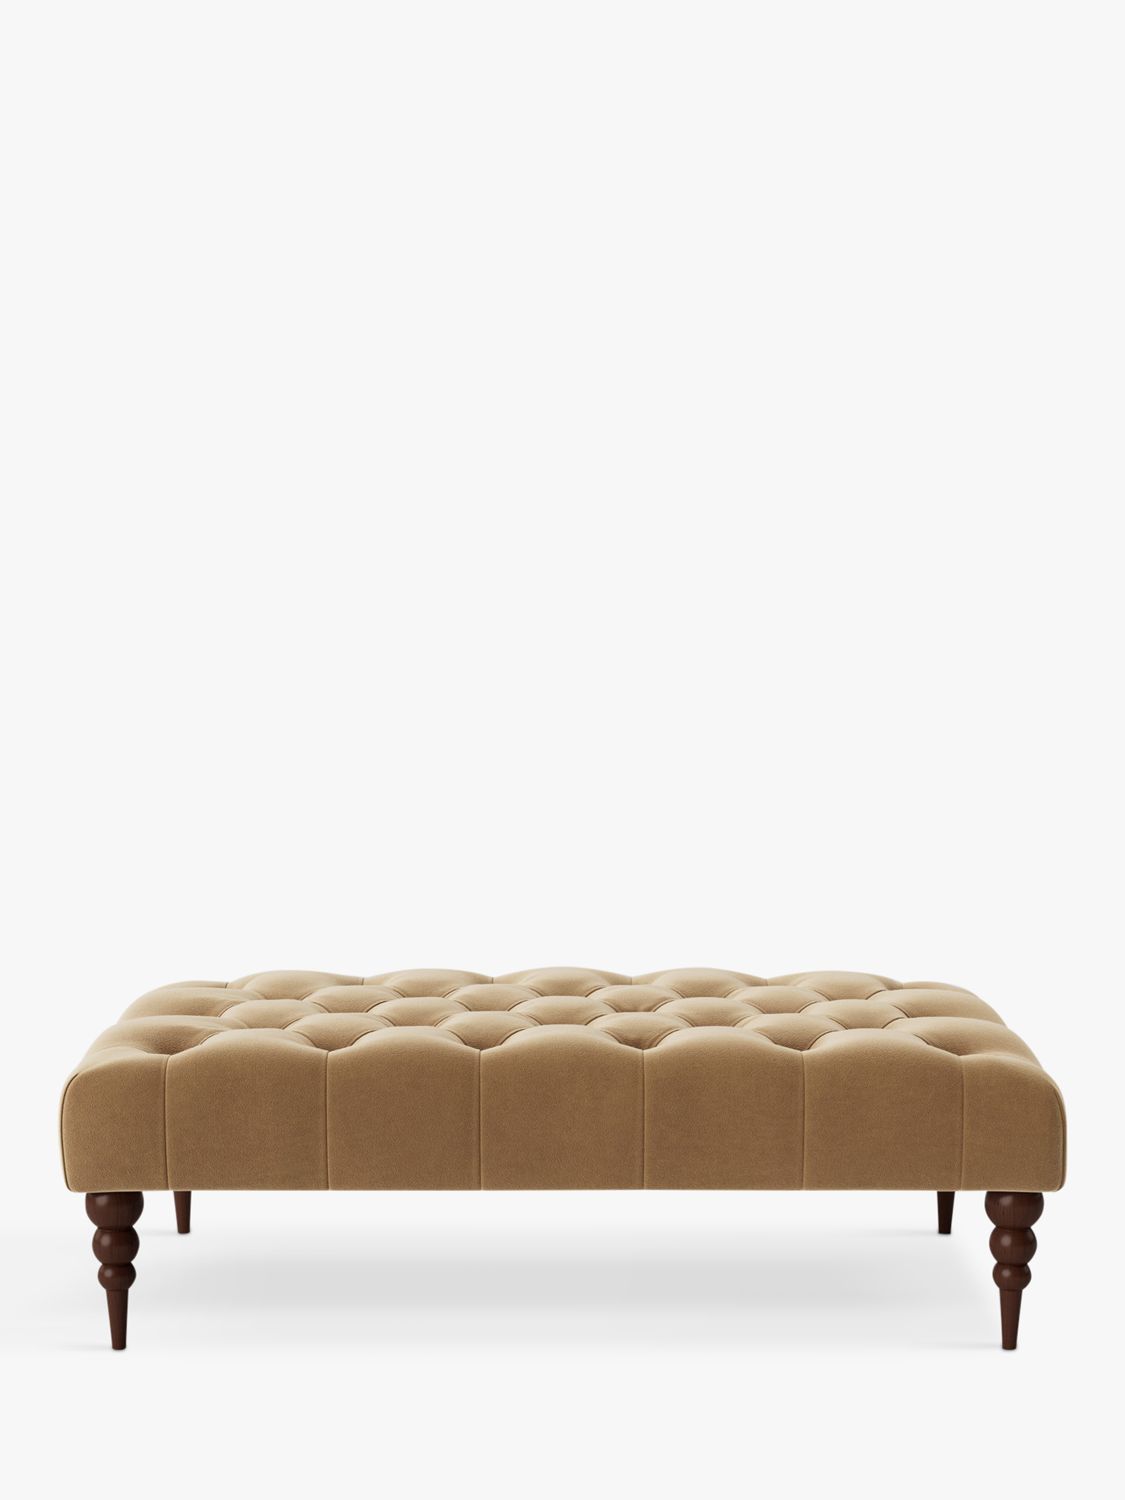 Plymouth Range, Swoon Plymouth Footstool, Easy Velvet Biscuit